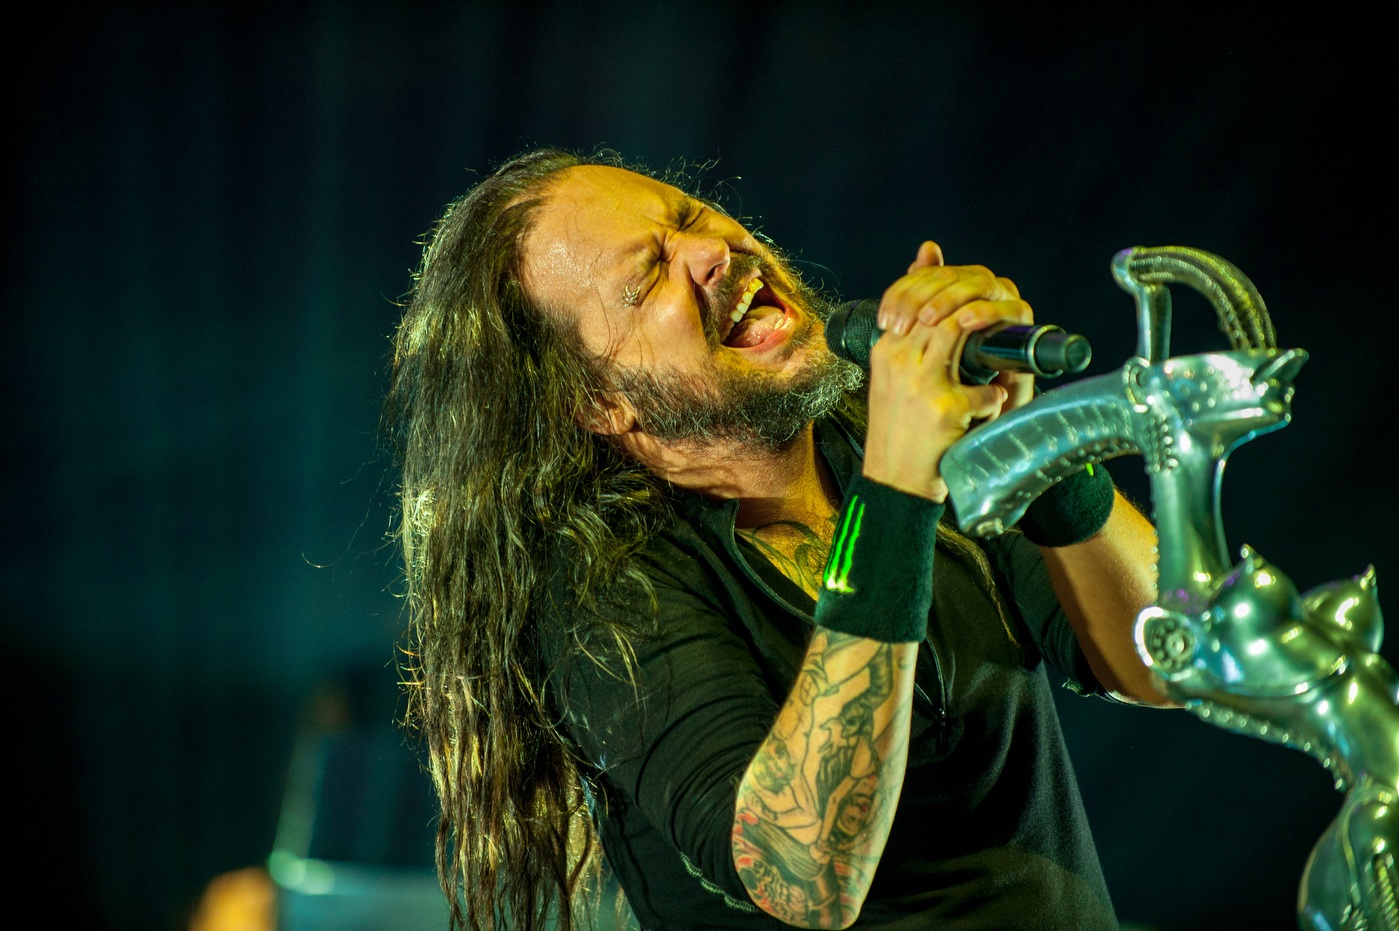 Korn - Ace Hotel - photo by Kevin Estrada